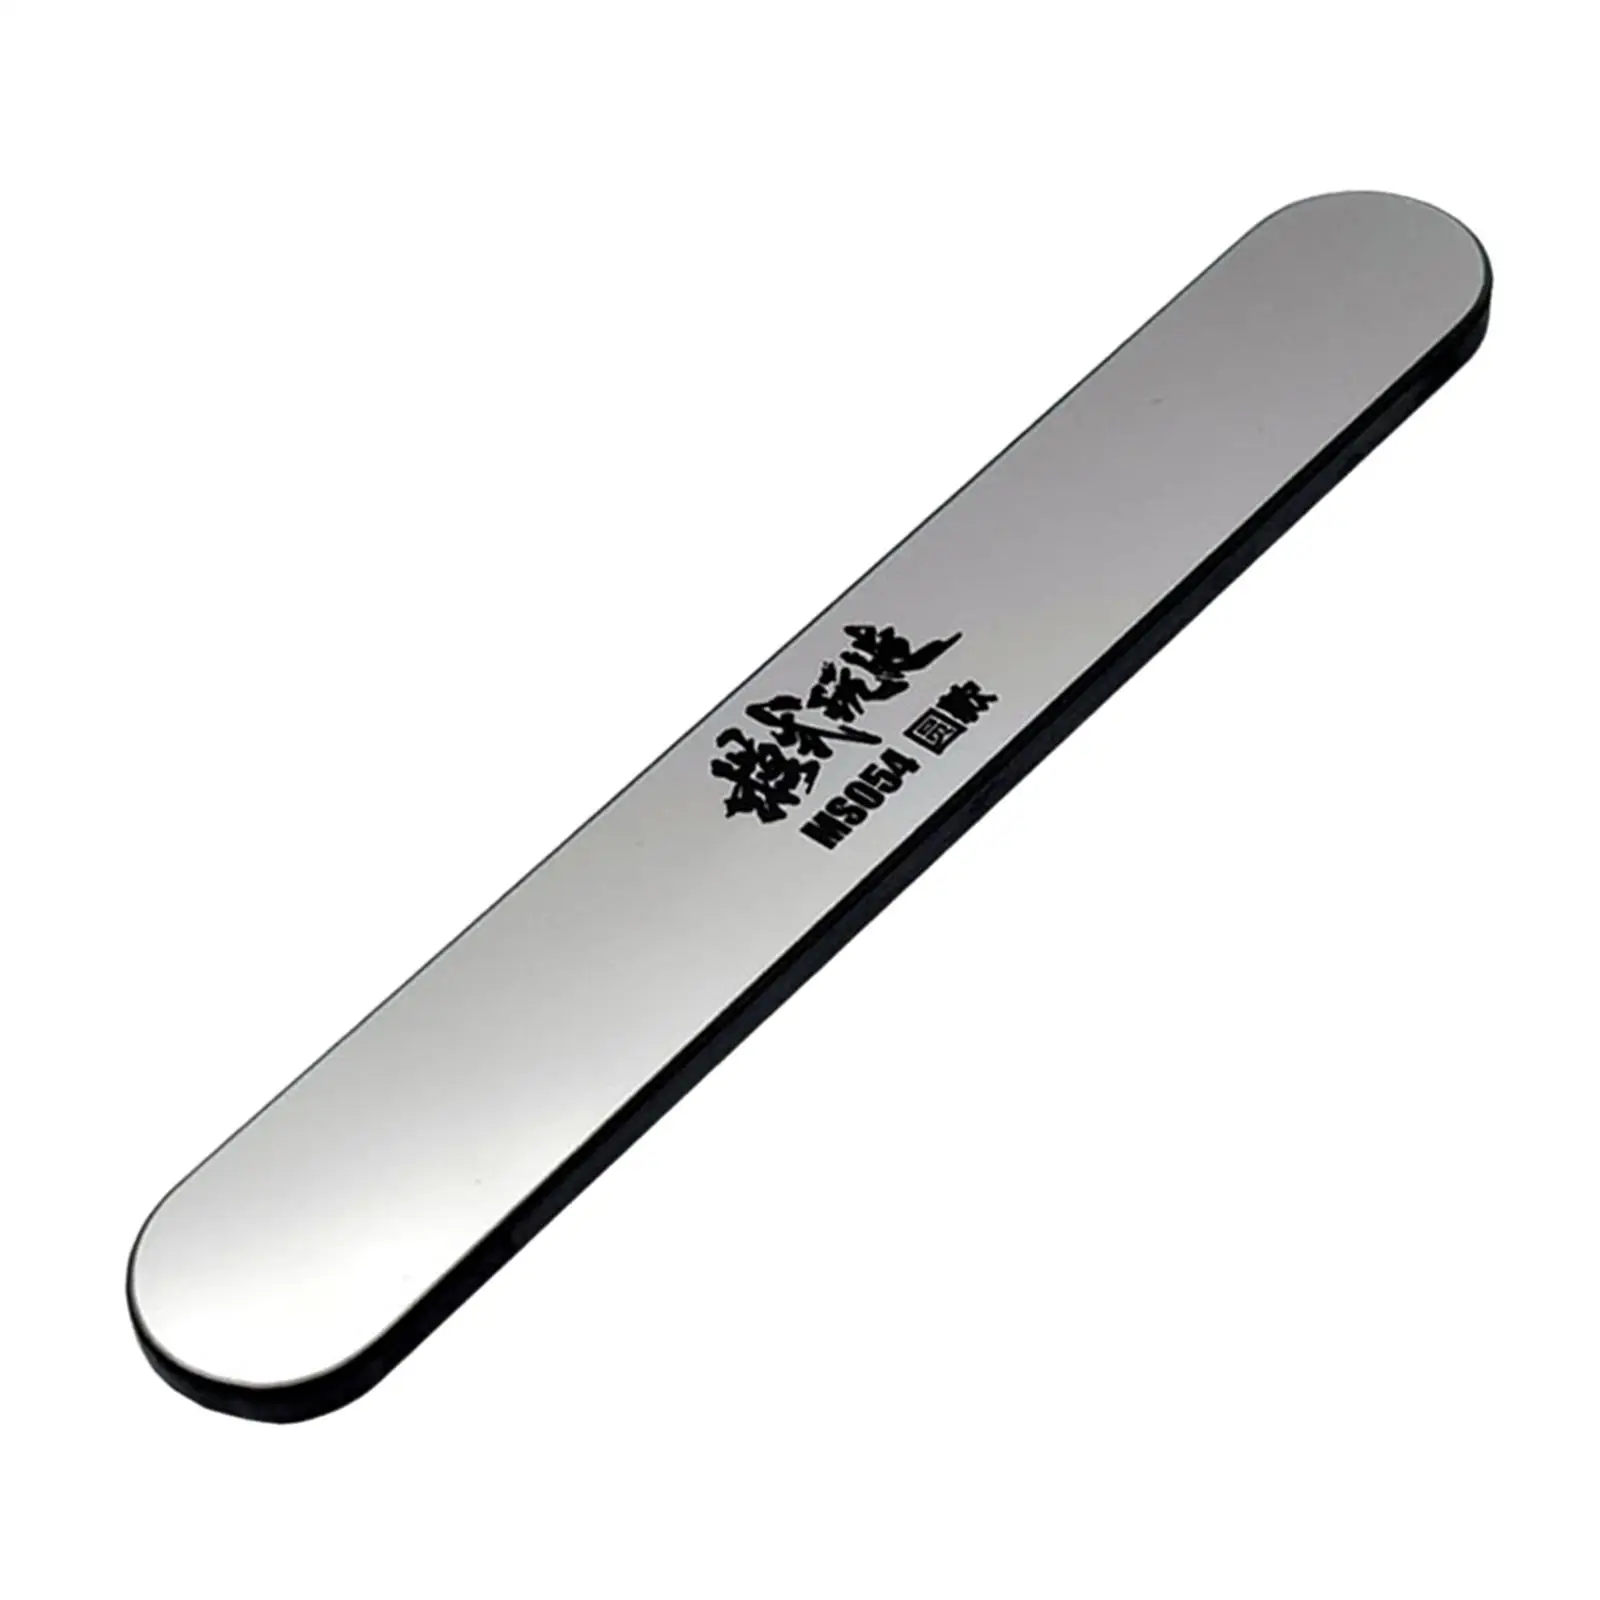 Precision Glass File for Models Hobby Polishing DIY Rustproof and for Car and Plane Kits